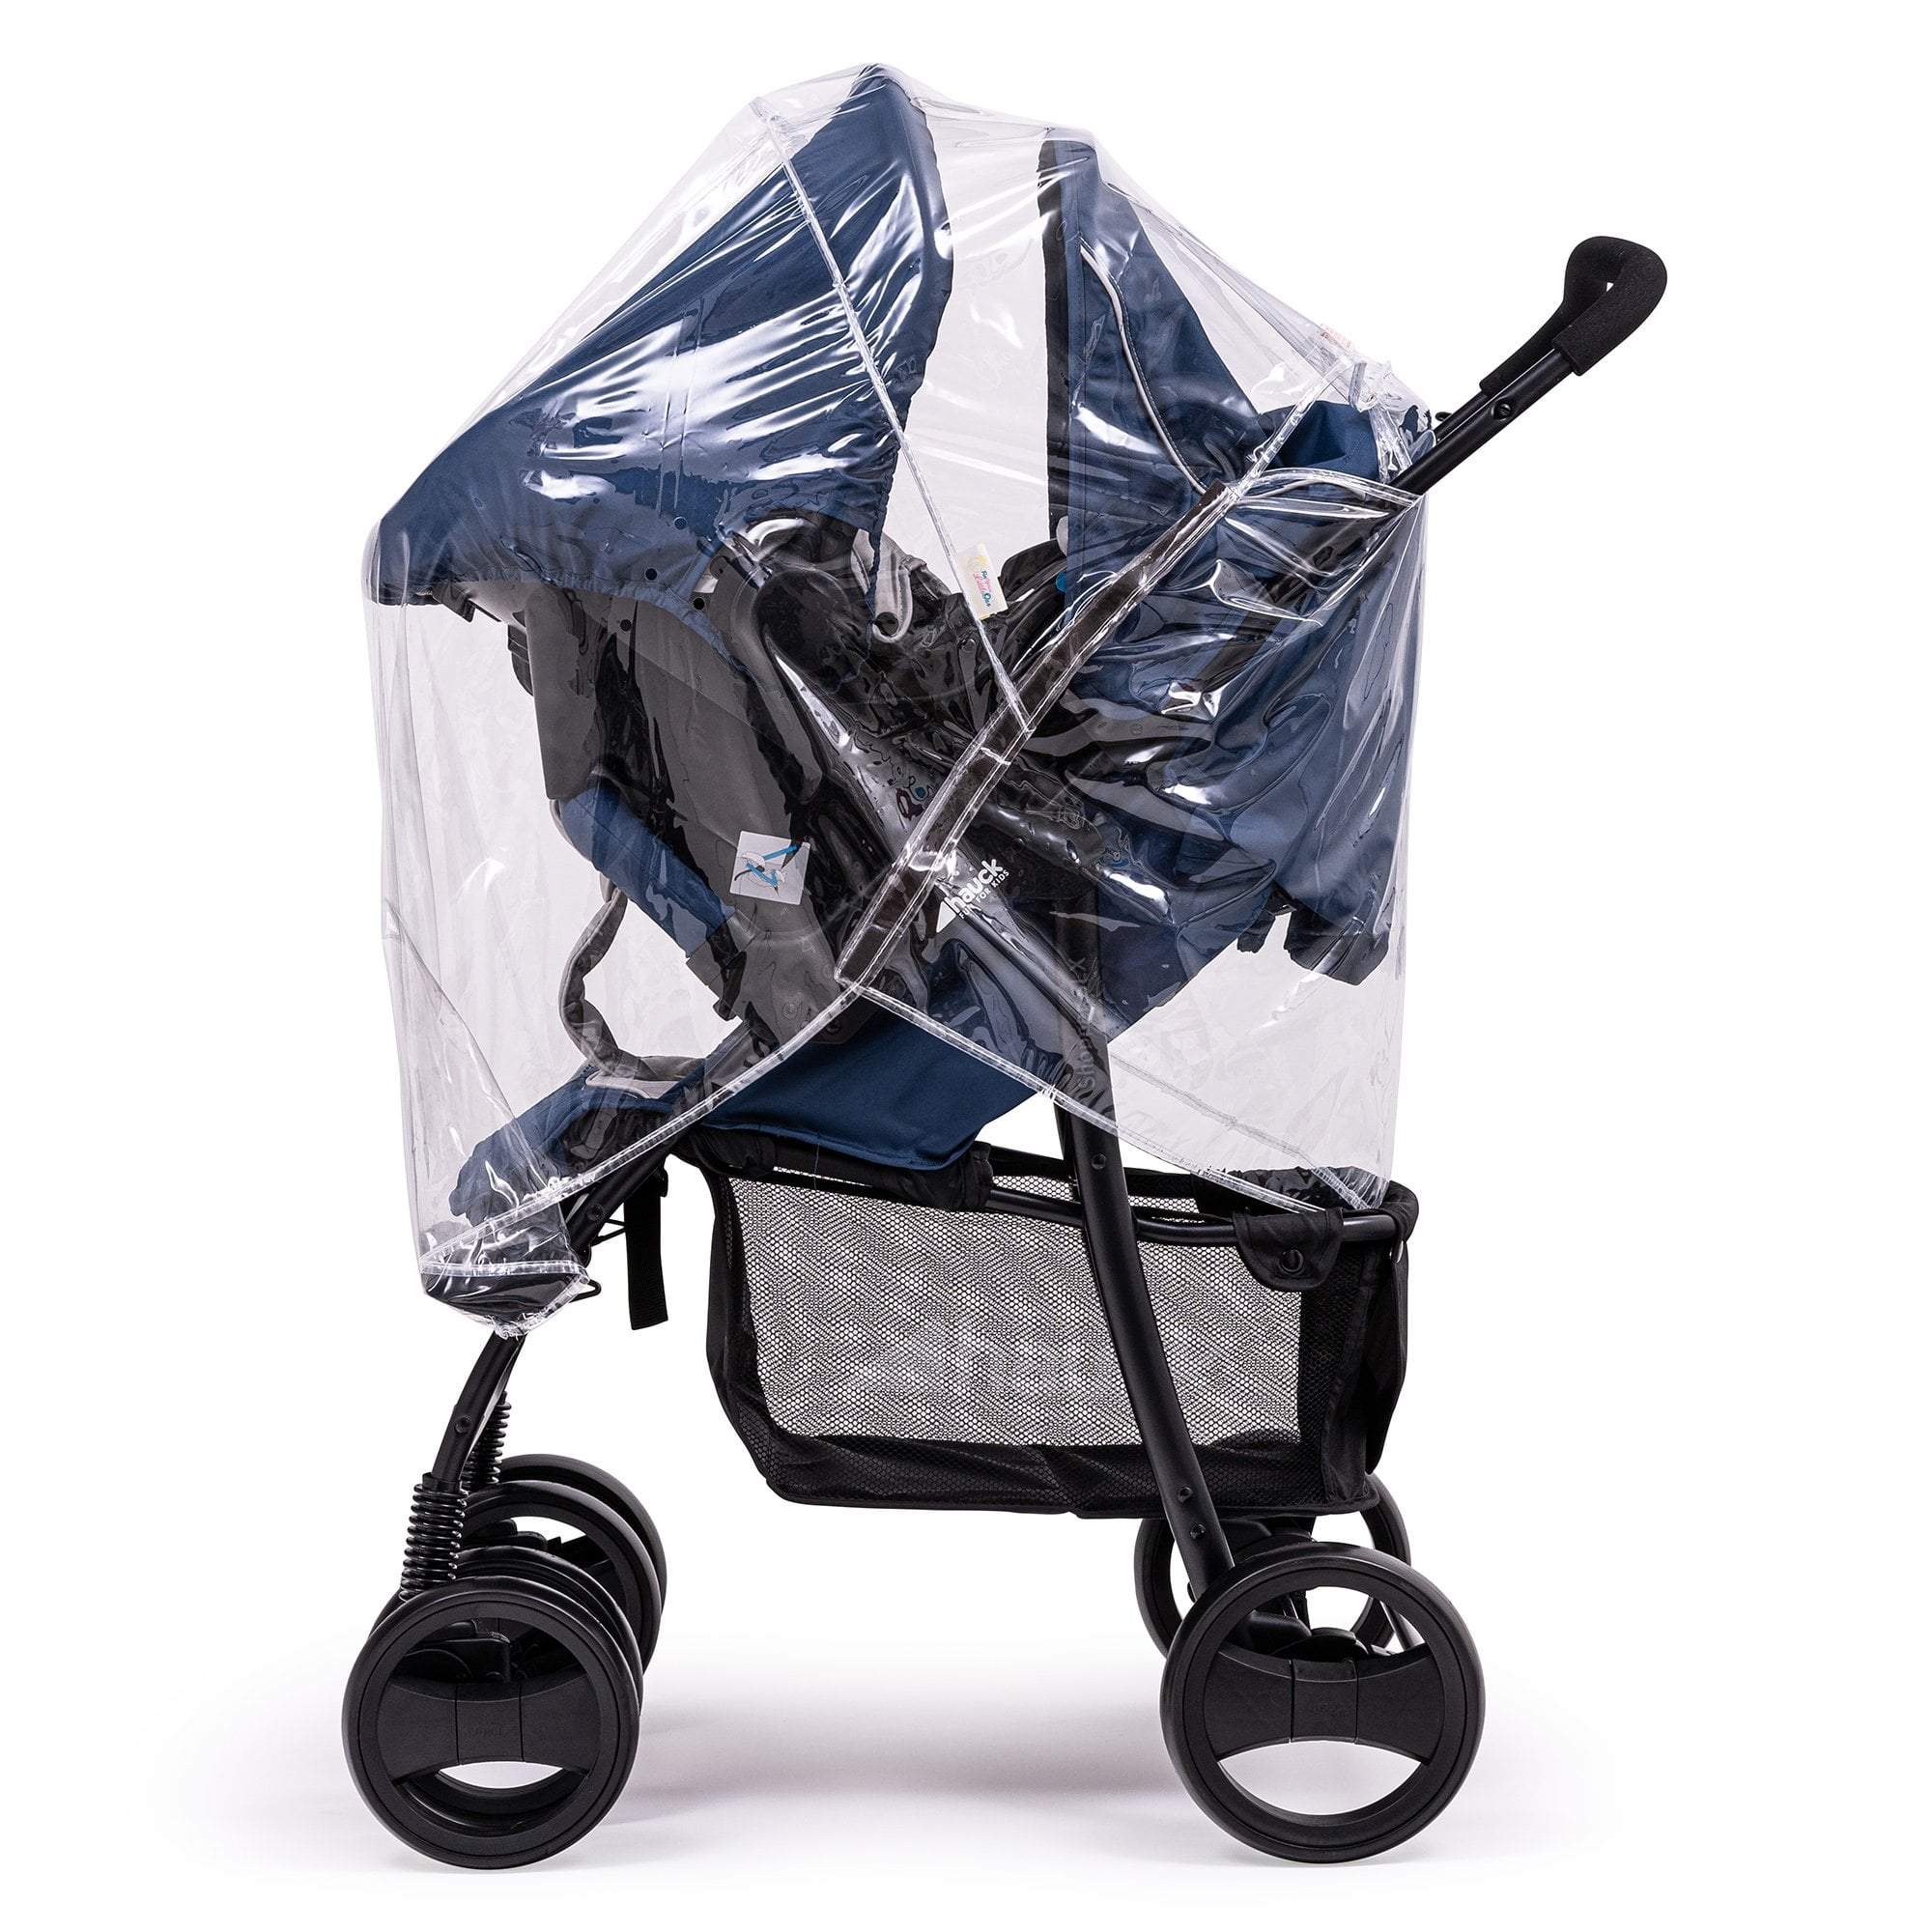 Travel System Raincover Compatible with Seed - Fits All Models - For Your Little One